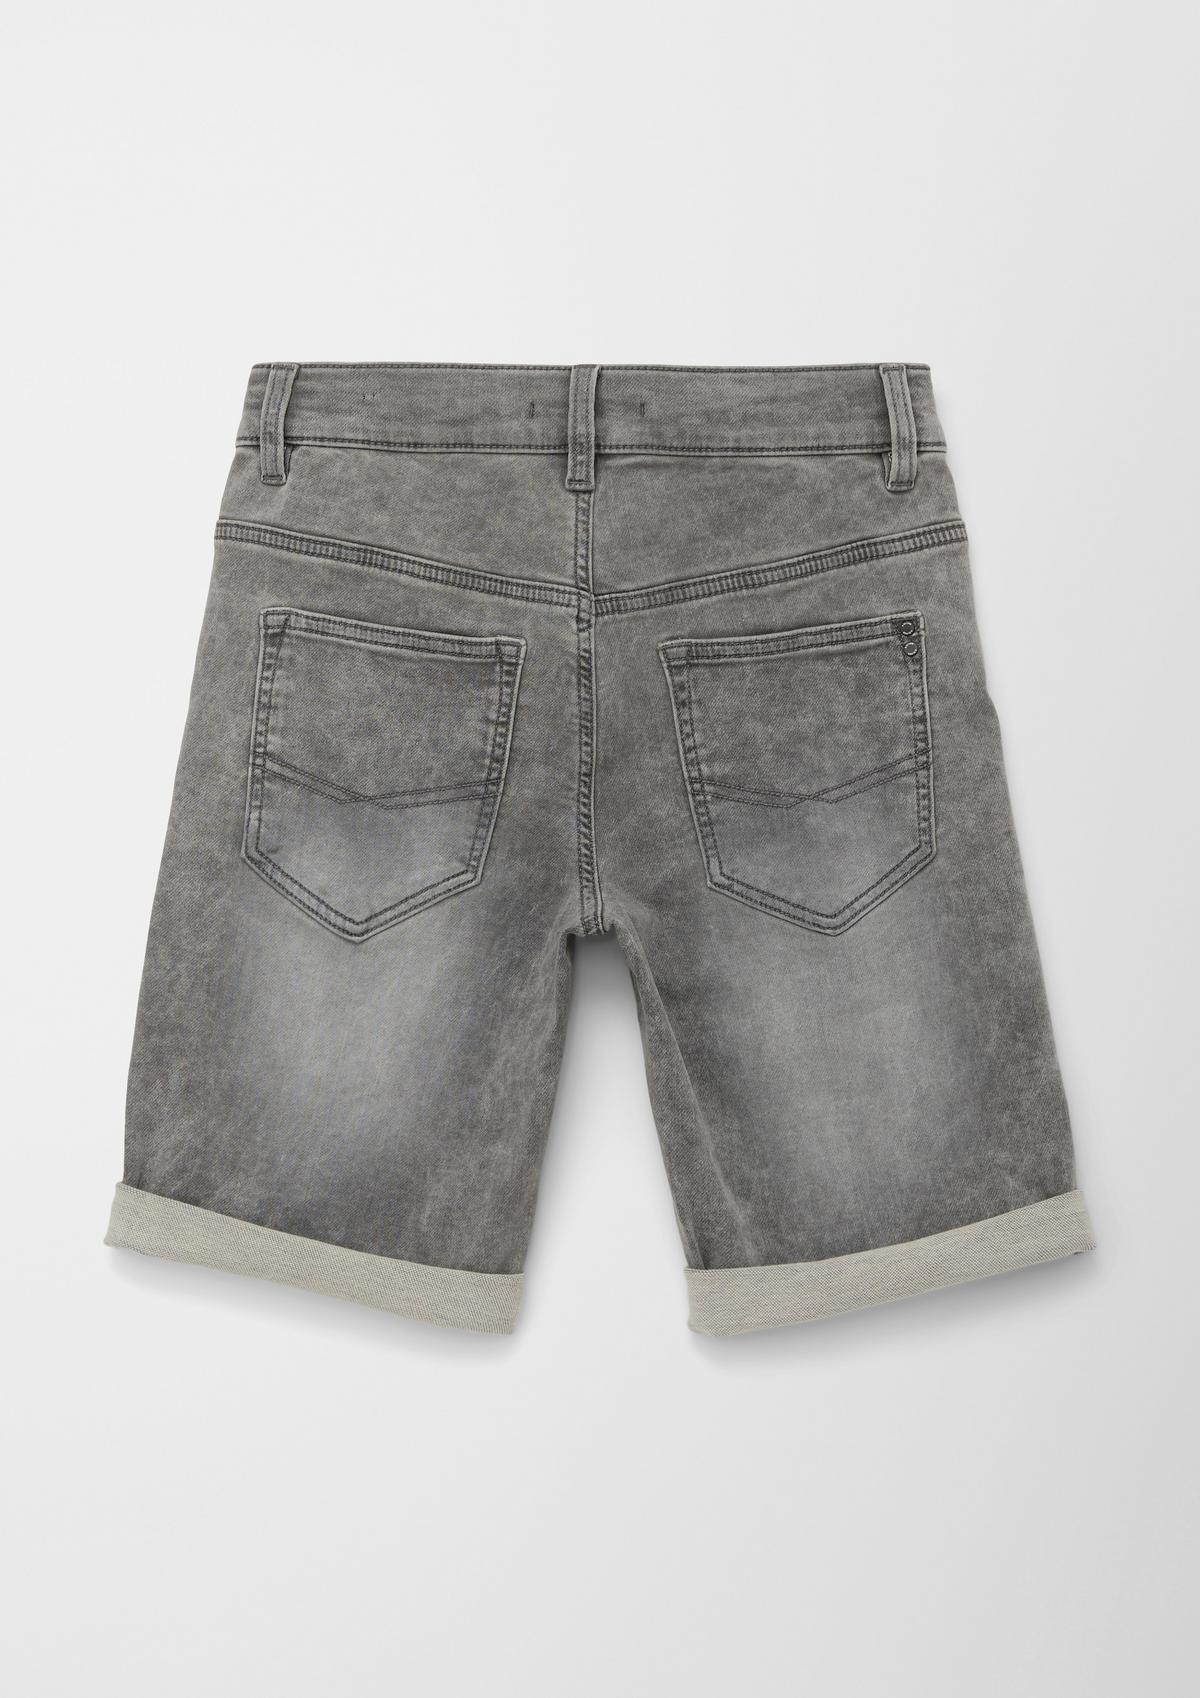 s.Oliver Skinny Seattle: Bermuda shorts with distressed effects